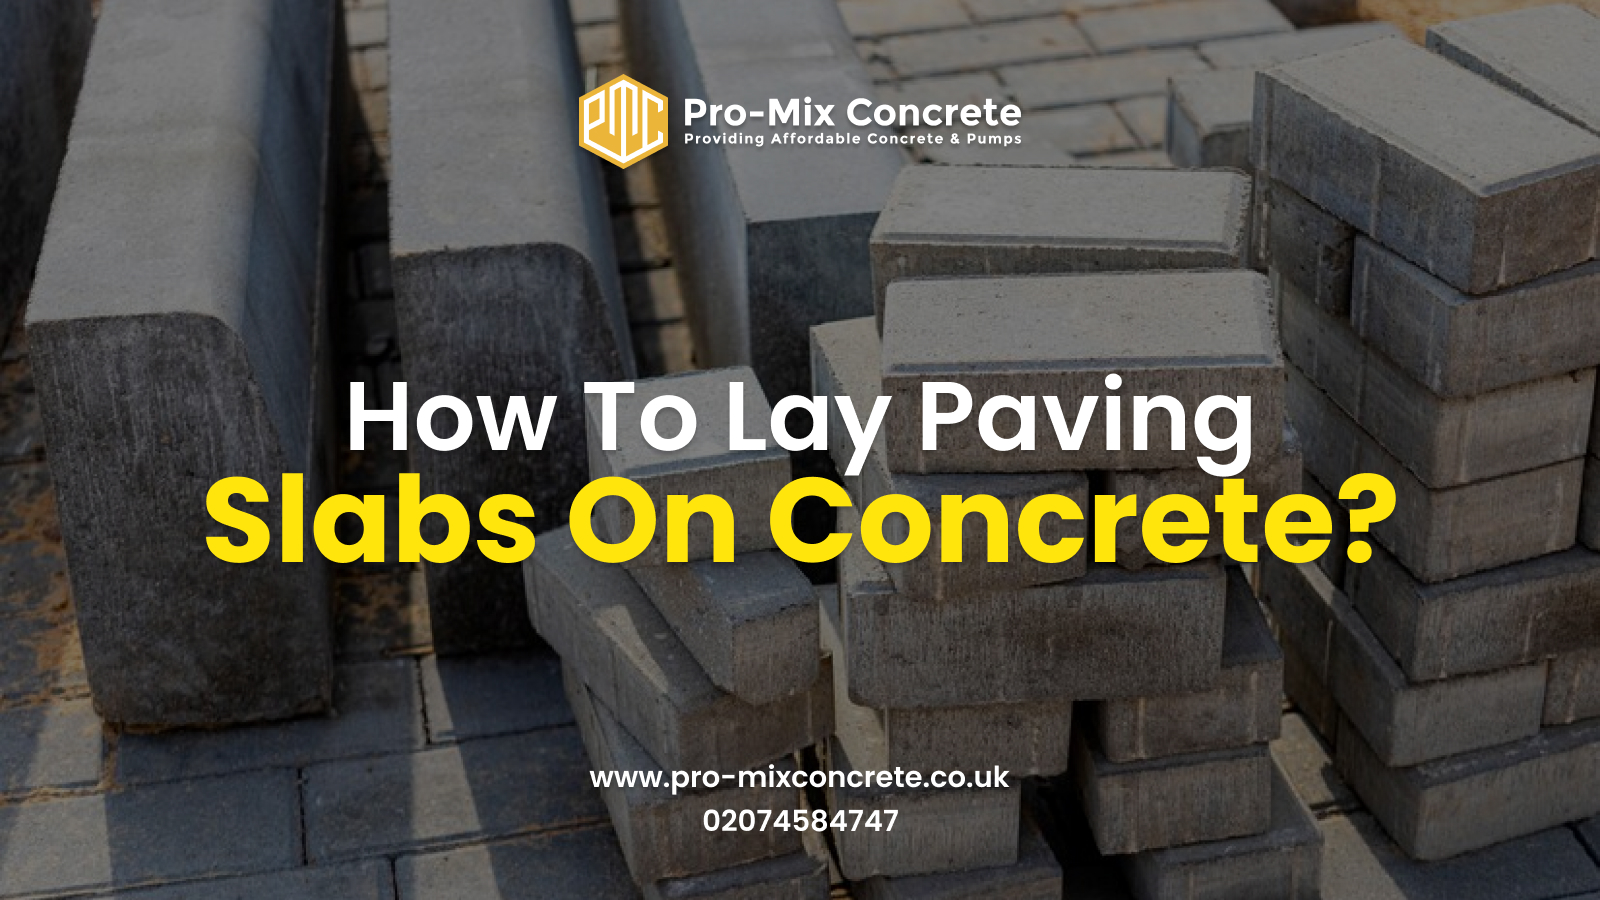 How To Lay Paving Slabs On Concrete